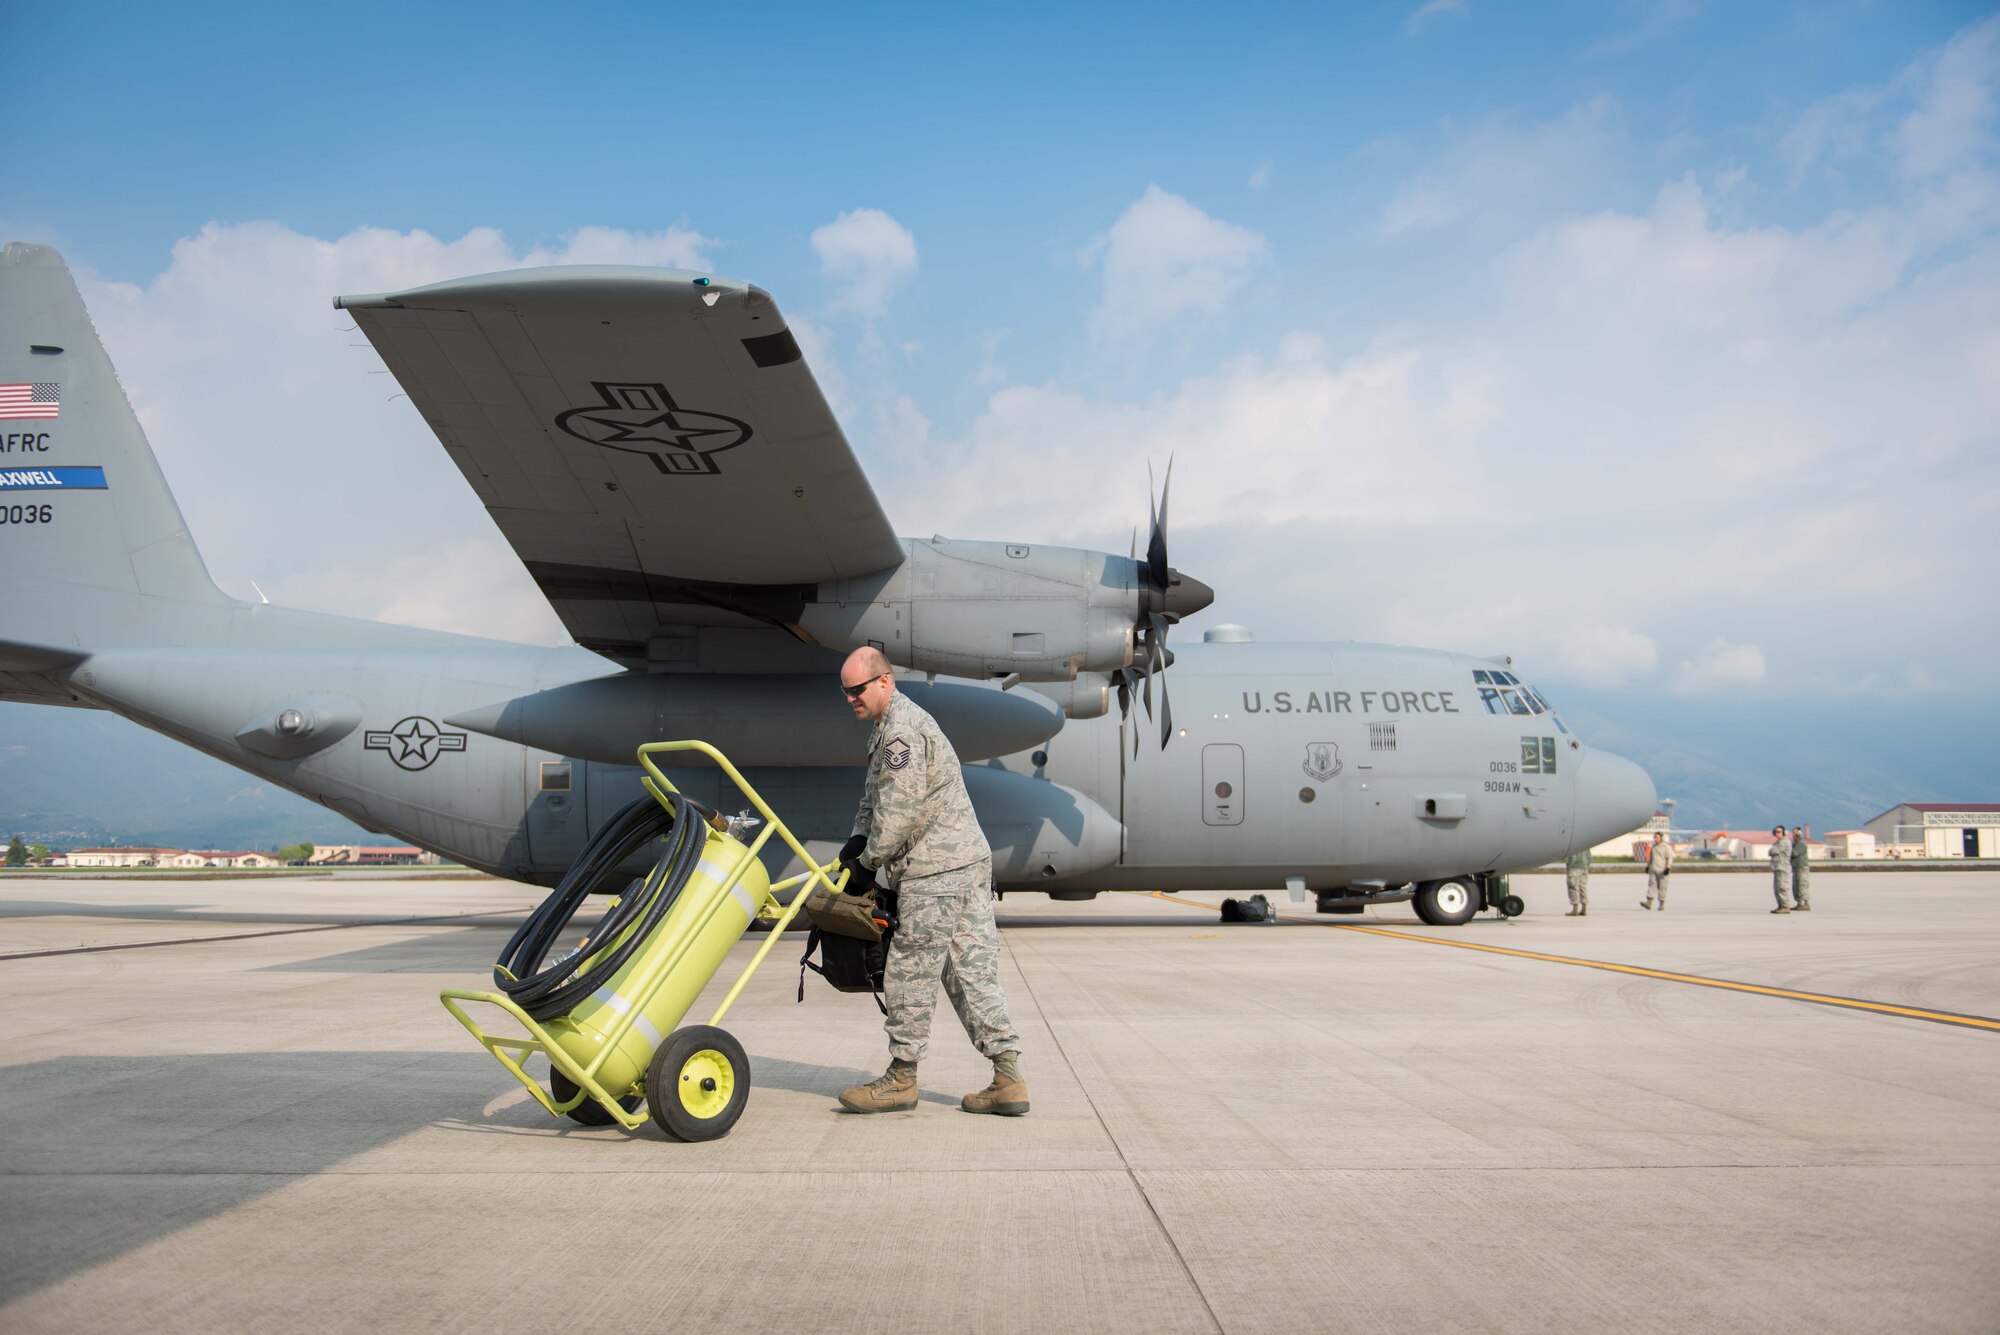 Master Sgt. Ian Owen, a crew chief from the Aircraft Maintenance Squadron, prepares the fire cart for a C-130 in preparation of a flight from Aviano AB, Italy, on 11 April, as a part of Exercise Saber Junction. (U.S. Air Force photo by Staff Sgt. Trevor Saylor)